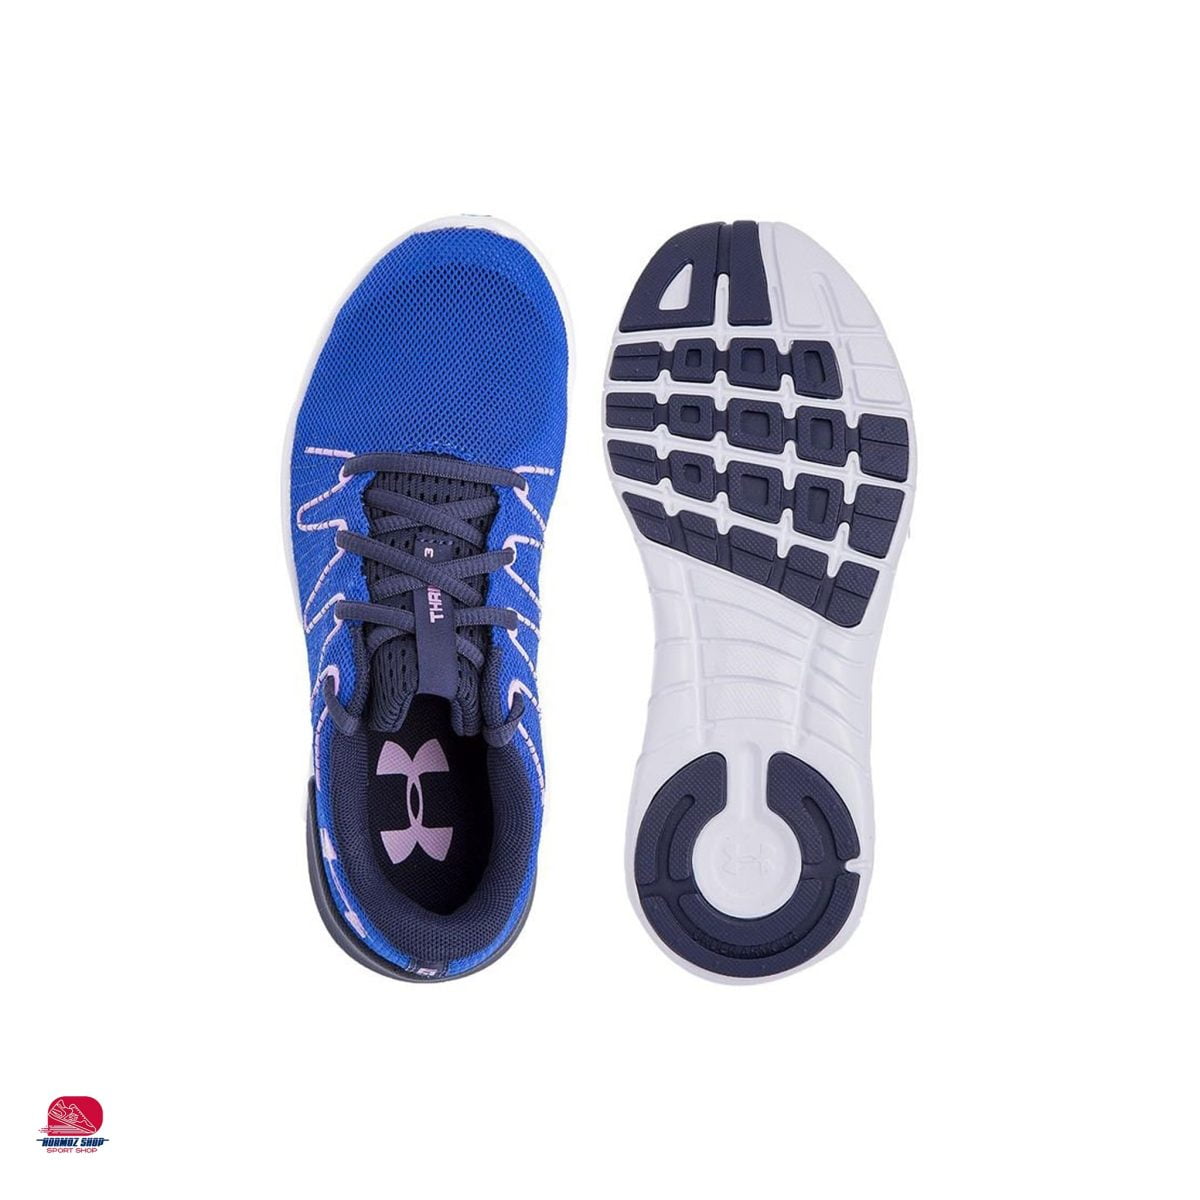 under armour 3654 093398 4 zoom